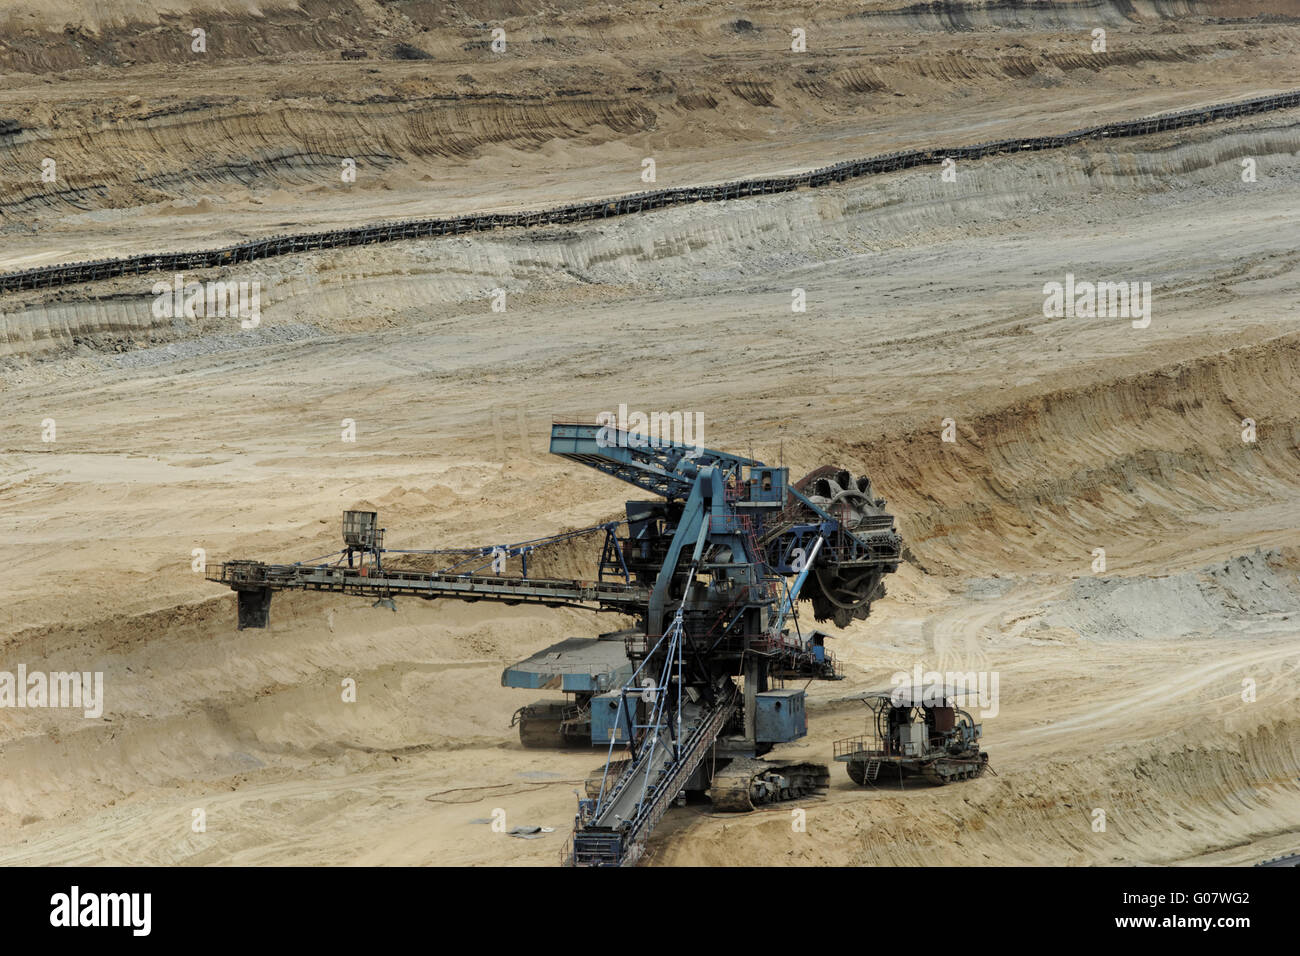 Coal mining in an open pit with huge industrial machine Stock Photo